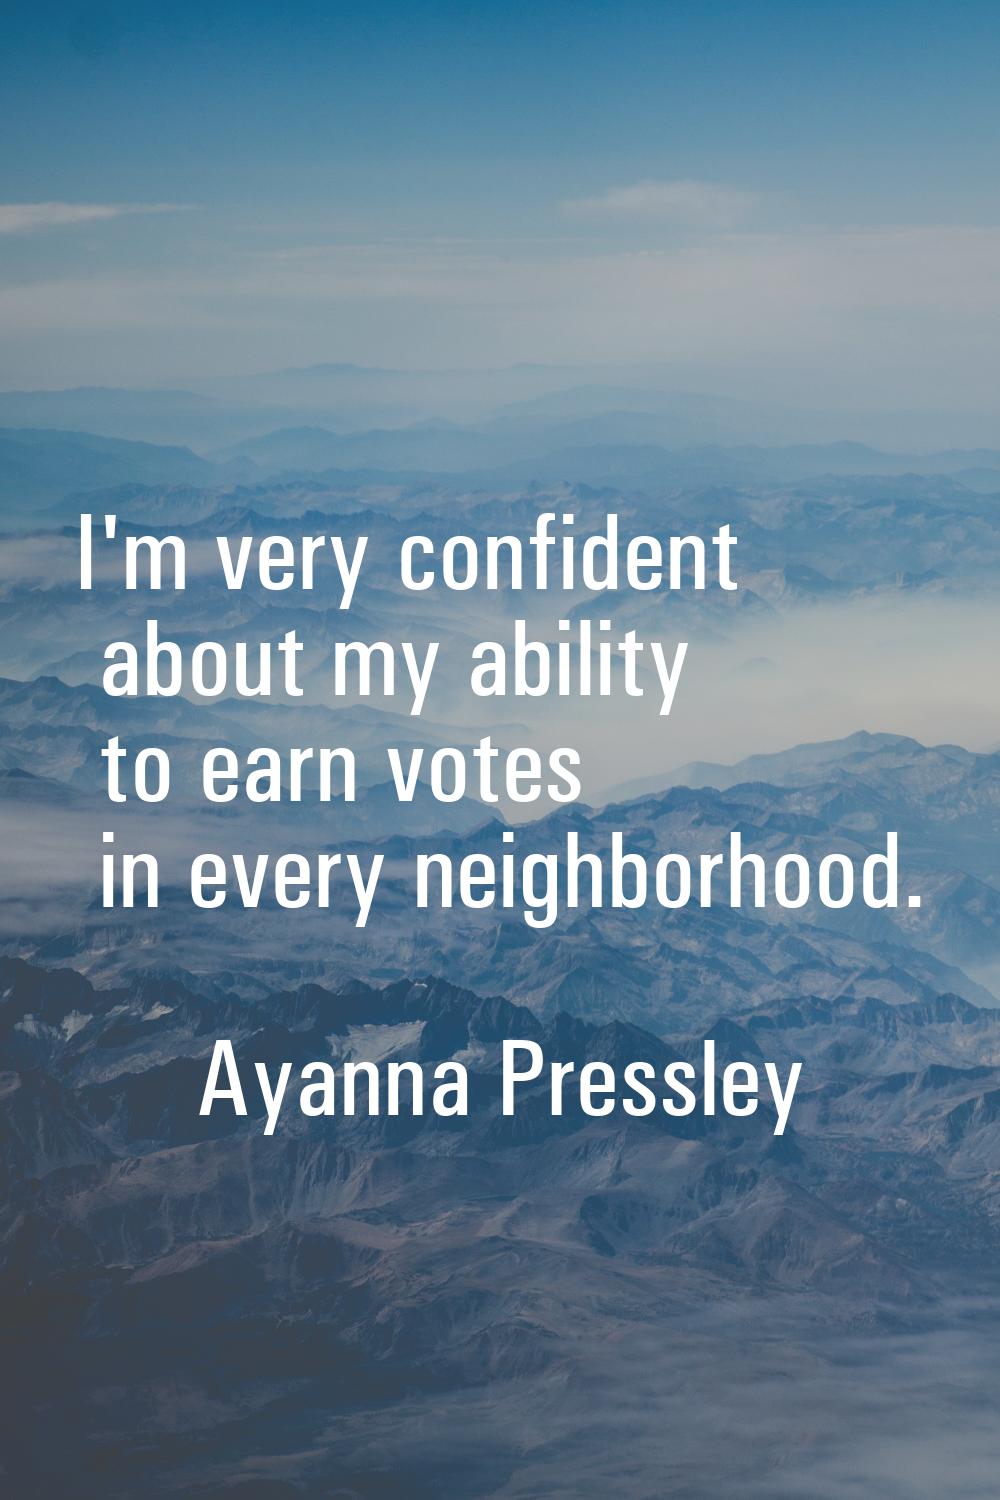 I'm very confident about my ability to earn votes in every neighborhood.